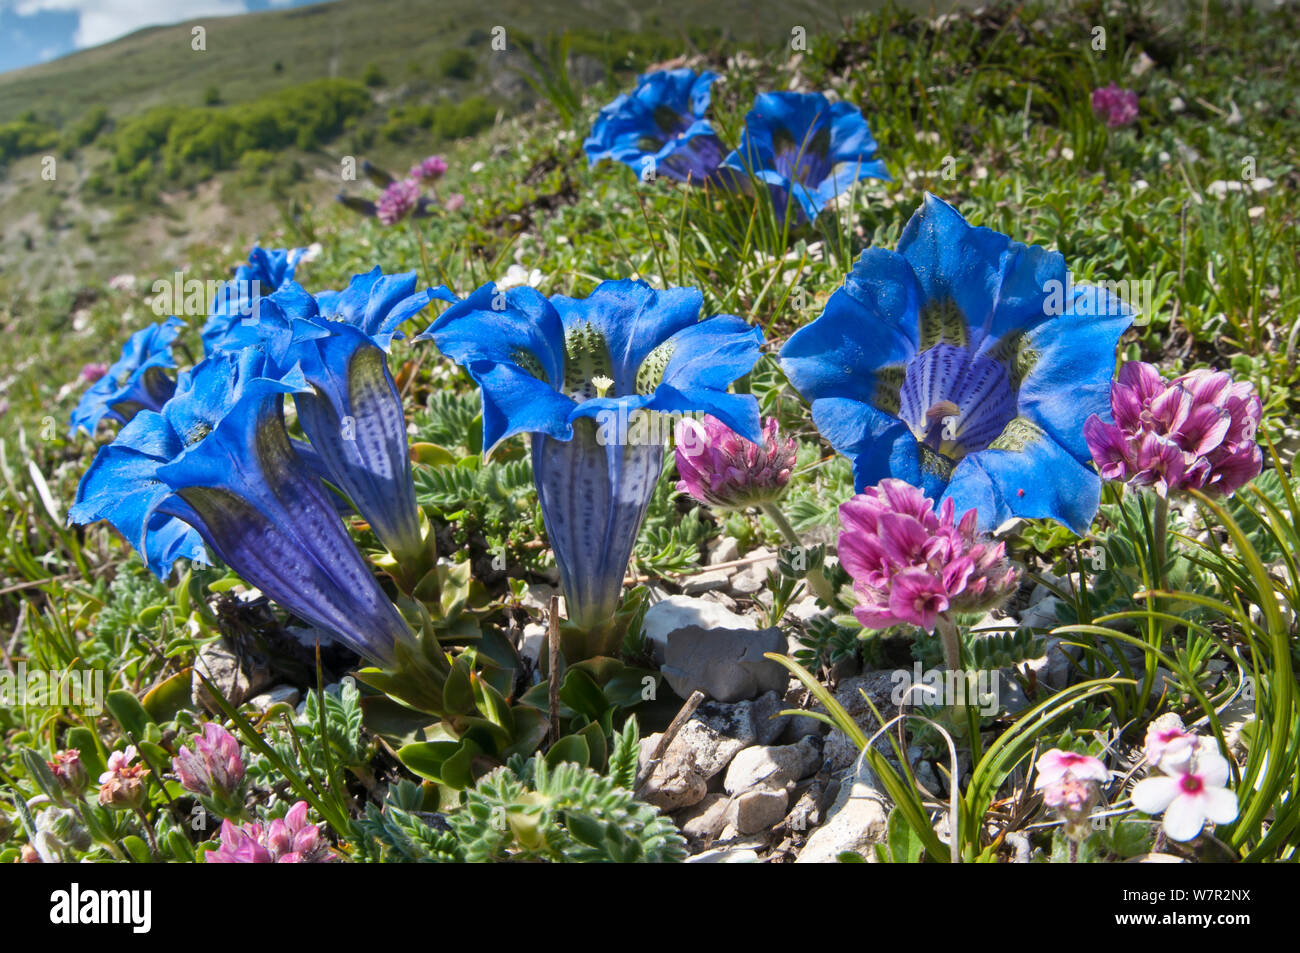 Appennine Trumpet Gentian (Gentiana dinarica) in flower, Mount Vettore, Sibillini, Appennines, Le Marche, Italy, May Stock Photo